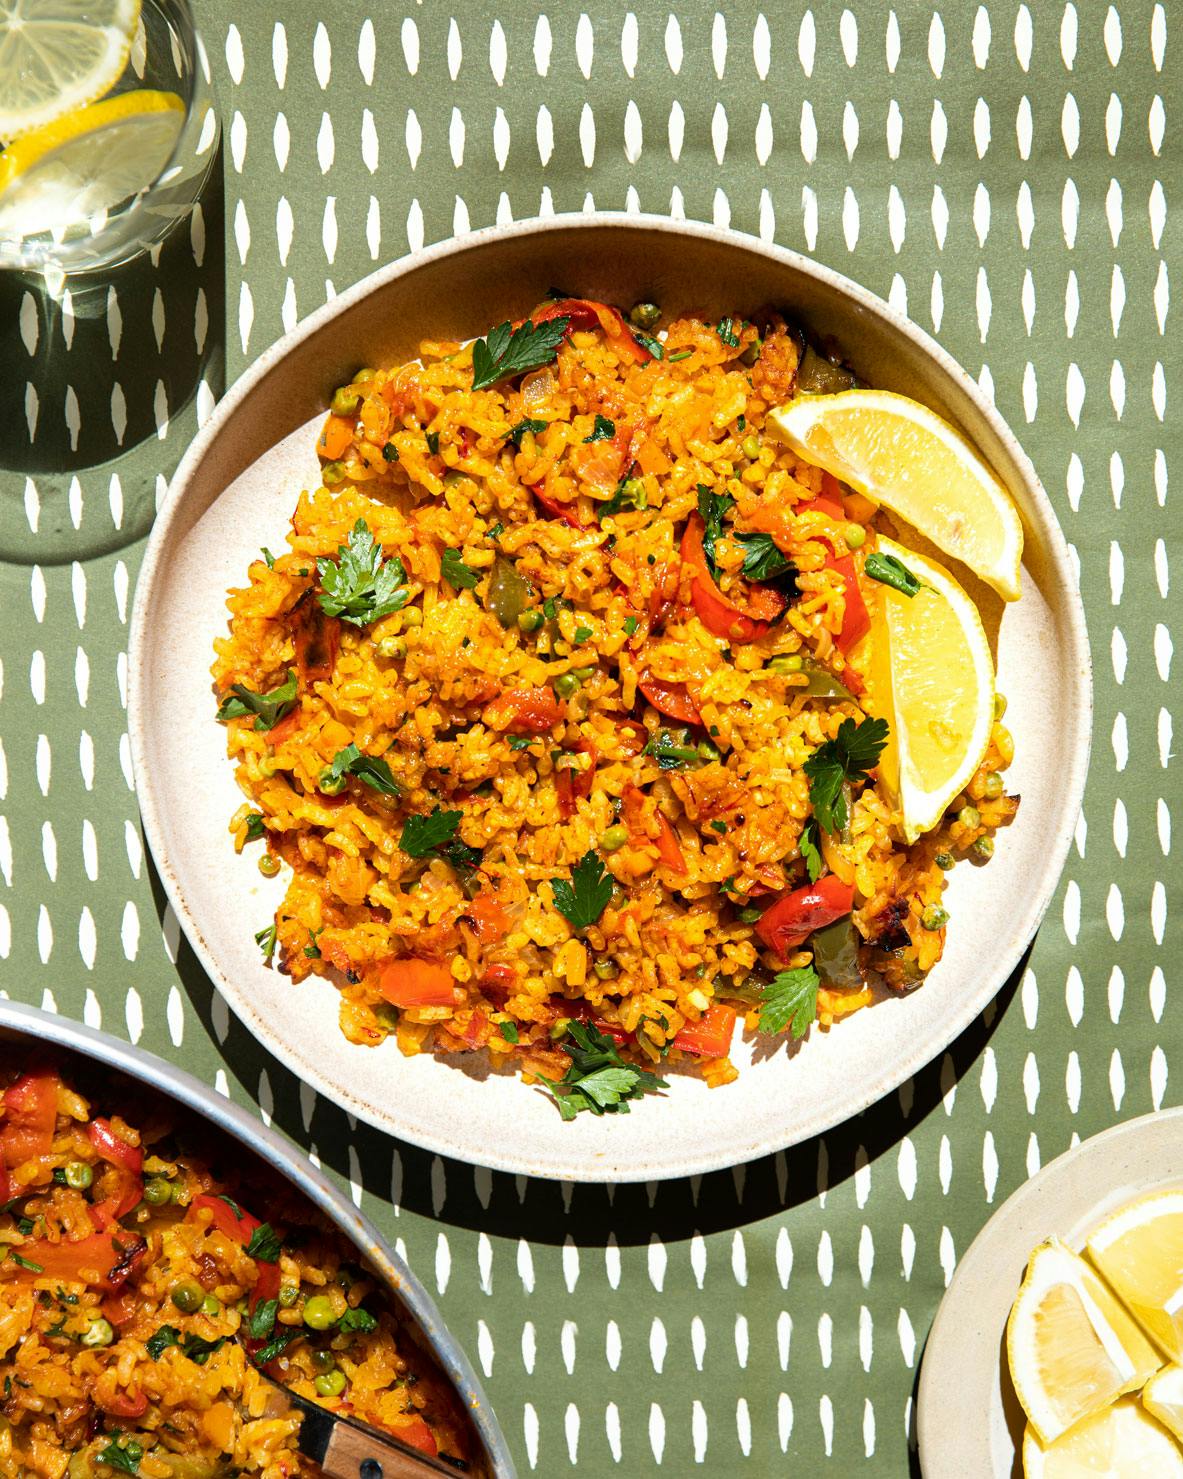 plate of paella with lemon wedges